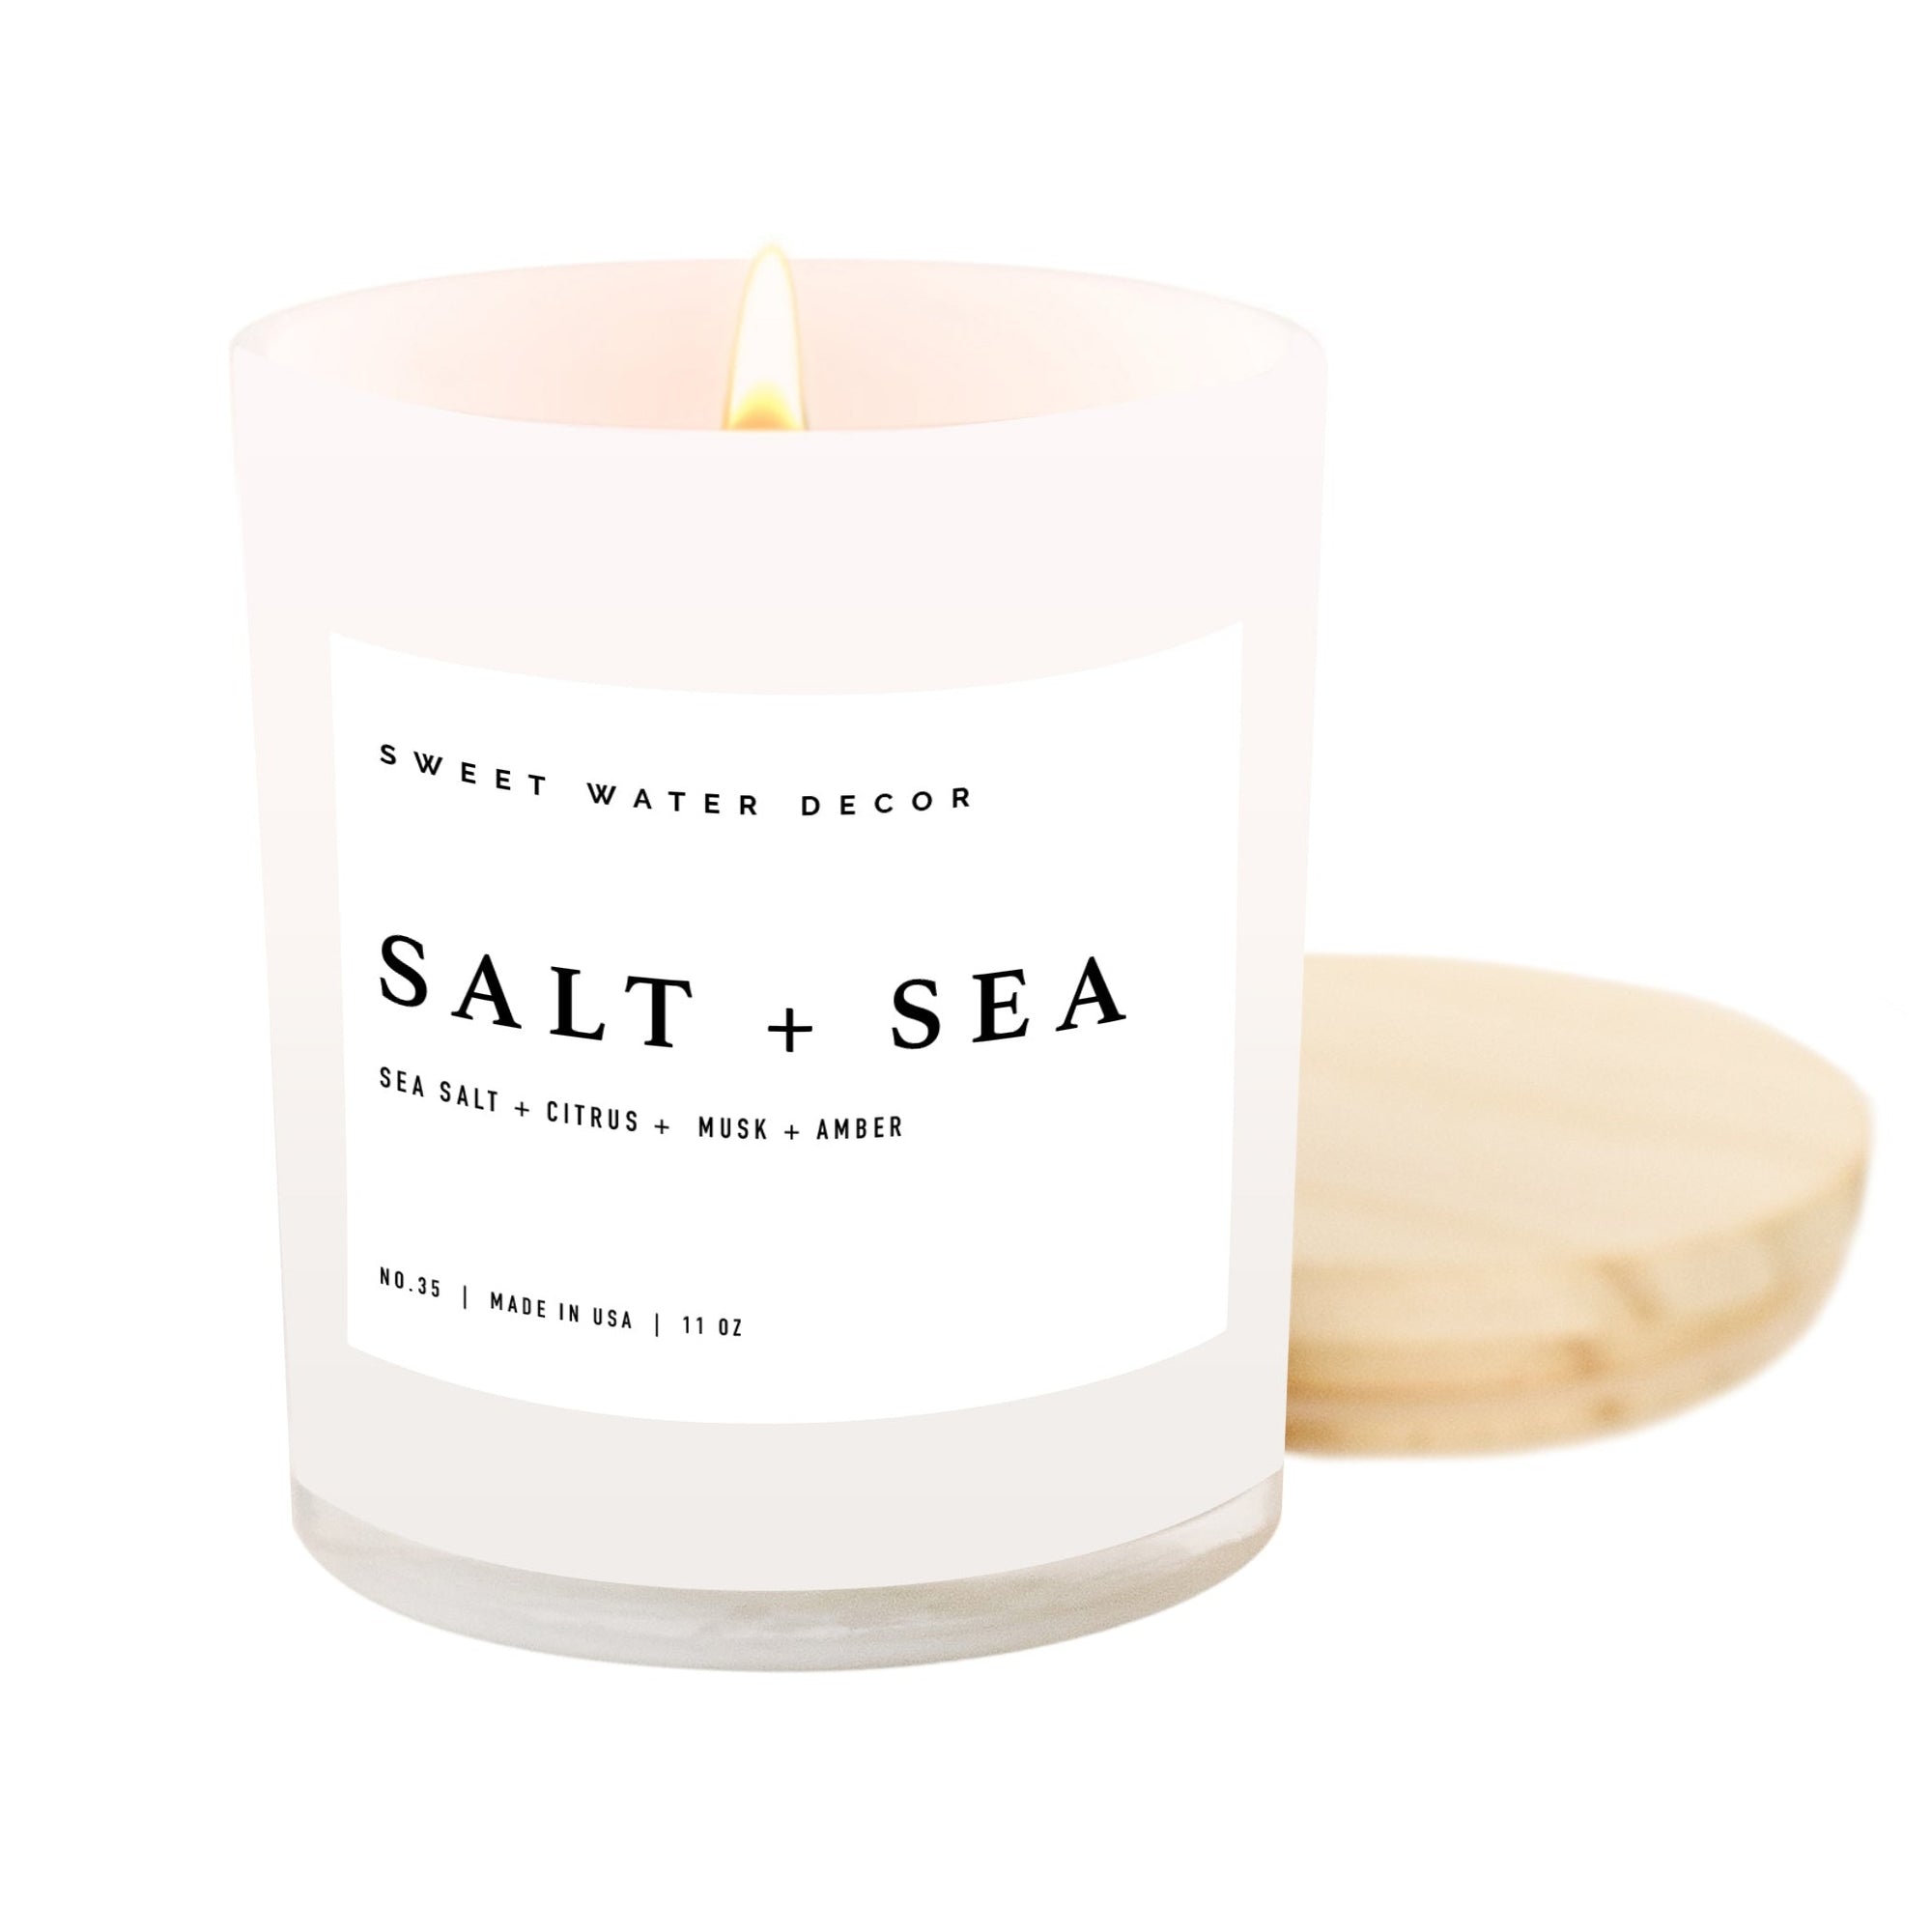 Our Salt & Sea Soy Candle is expertly crafted with a sophisticated scent, perfect for those who appreciate coastal living.